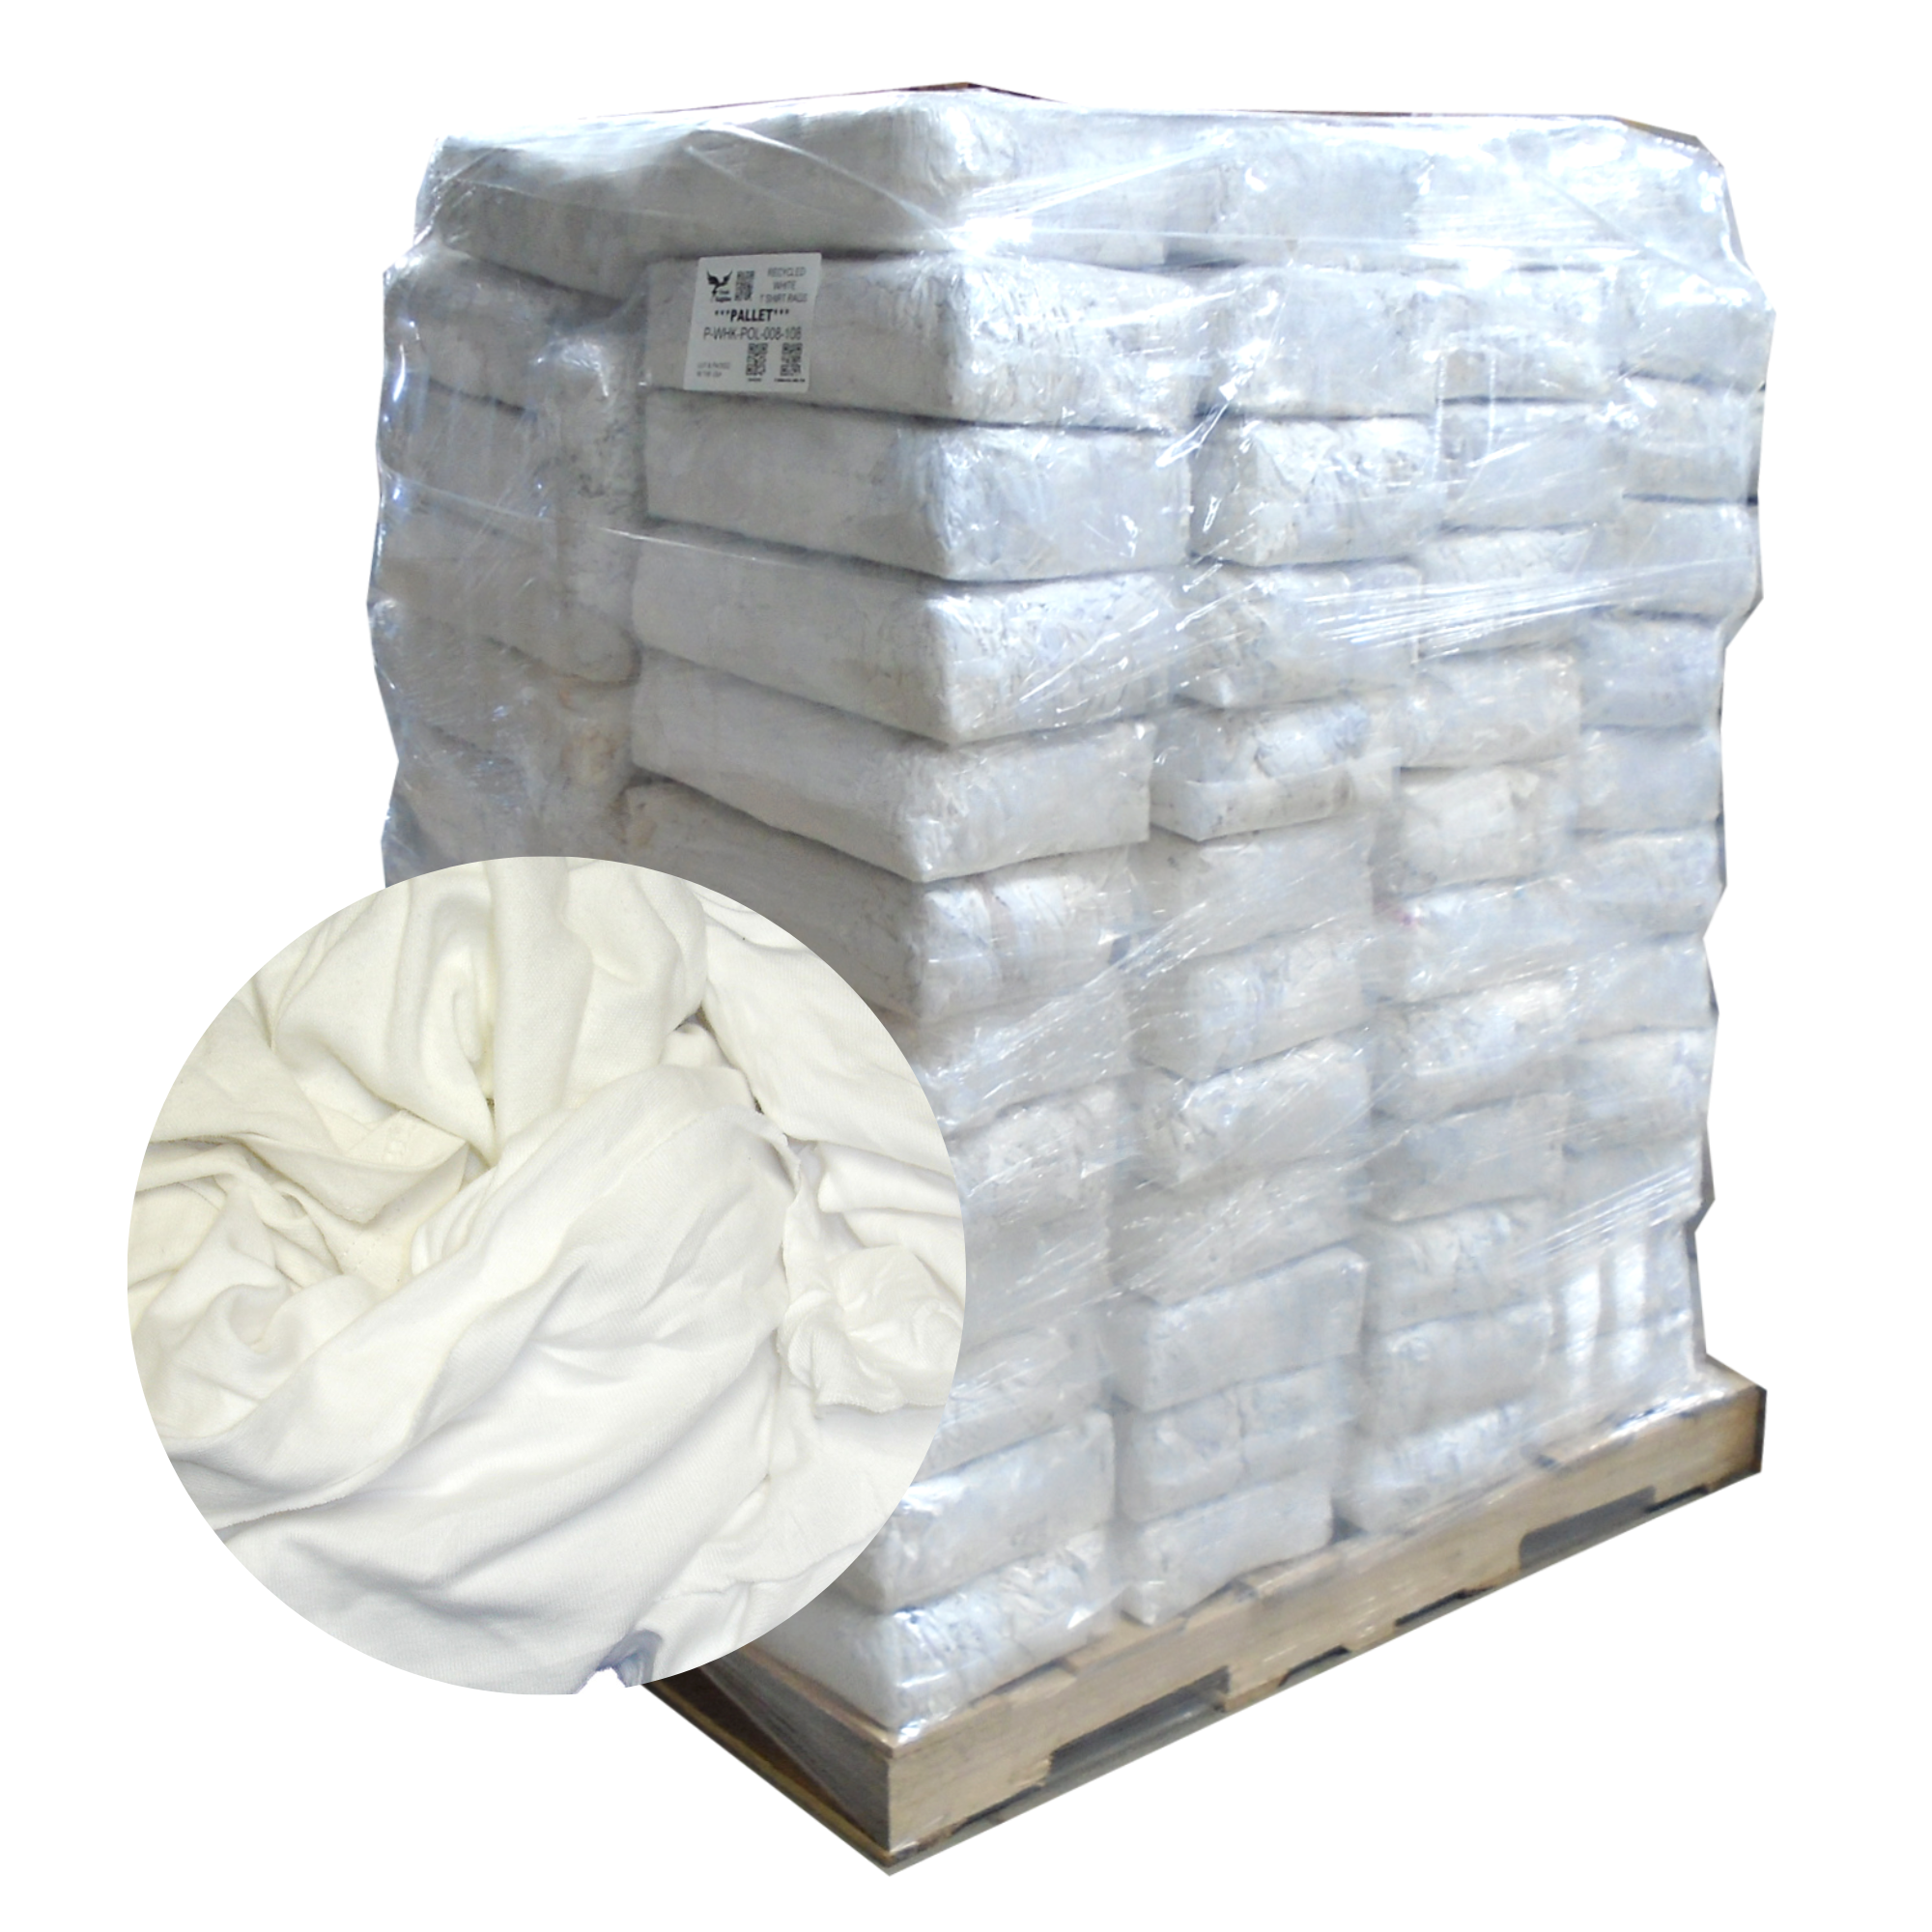 White Absorbent Cotton - Recycled Rags Pallet